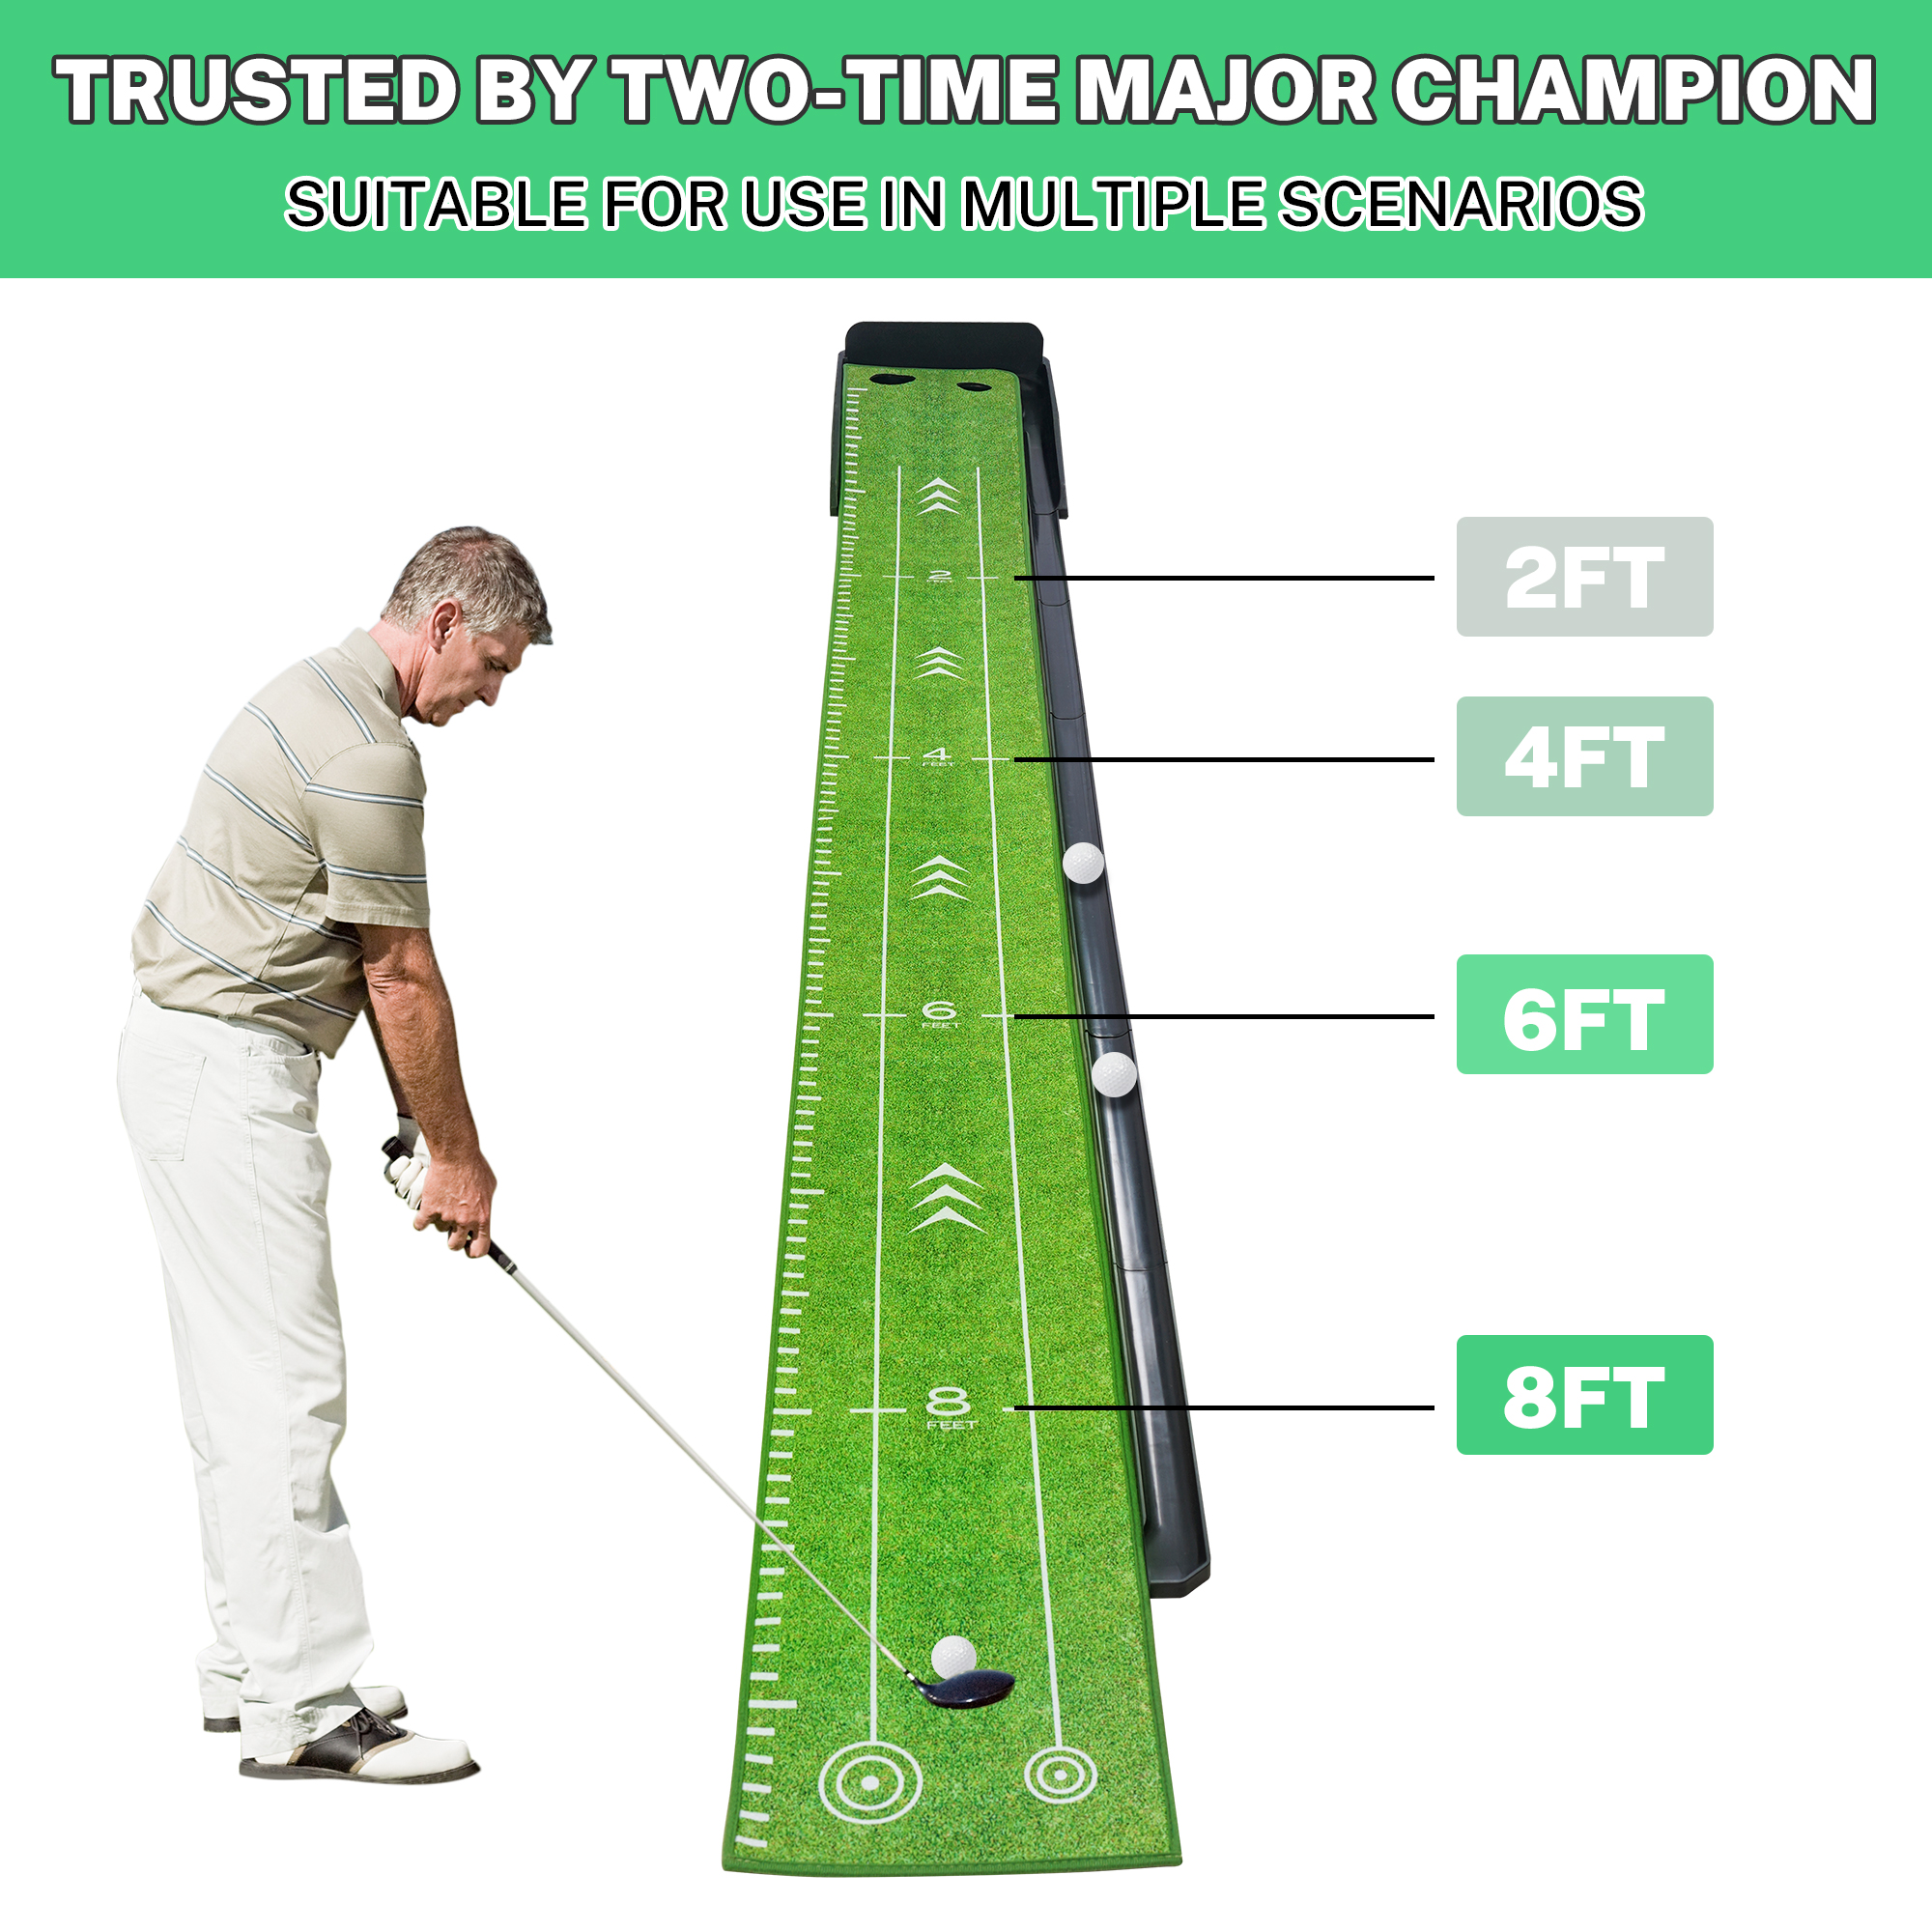 Segmart Putting Green Golf Mat for Indoors, Golf Training Bundles with 3 Bonus Balls, Improve Accuracy and Speed, Auto Ball Return, Indoor/Outdoor Practice Golf Accessories Golf Gift for Men - image 5 of 9